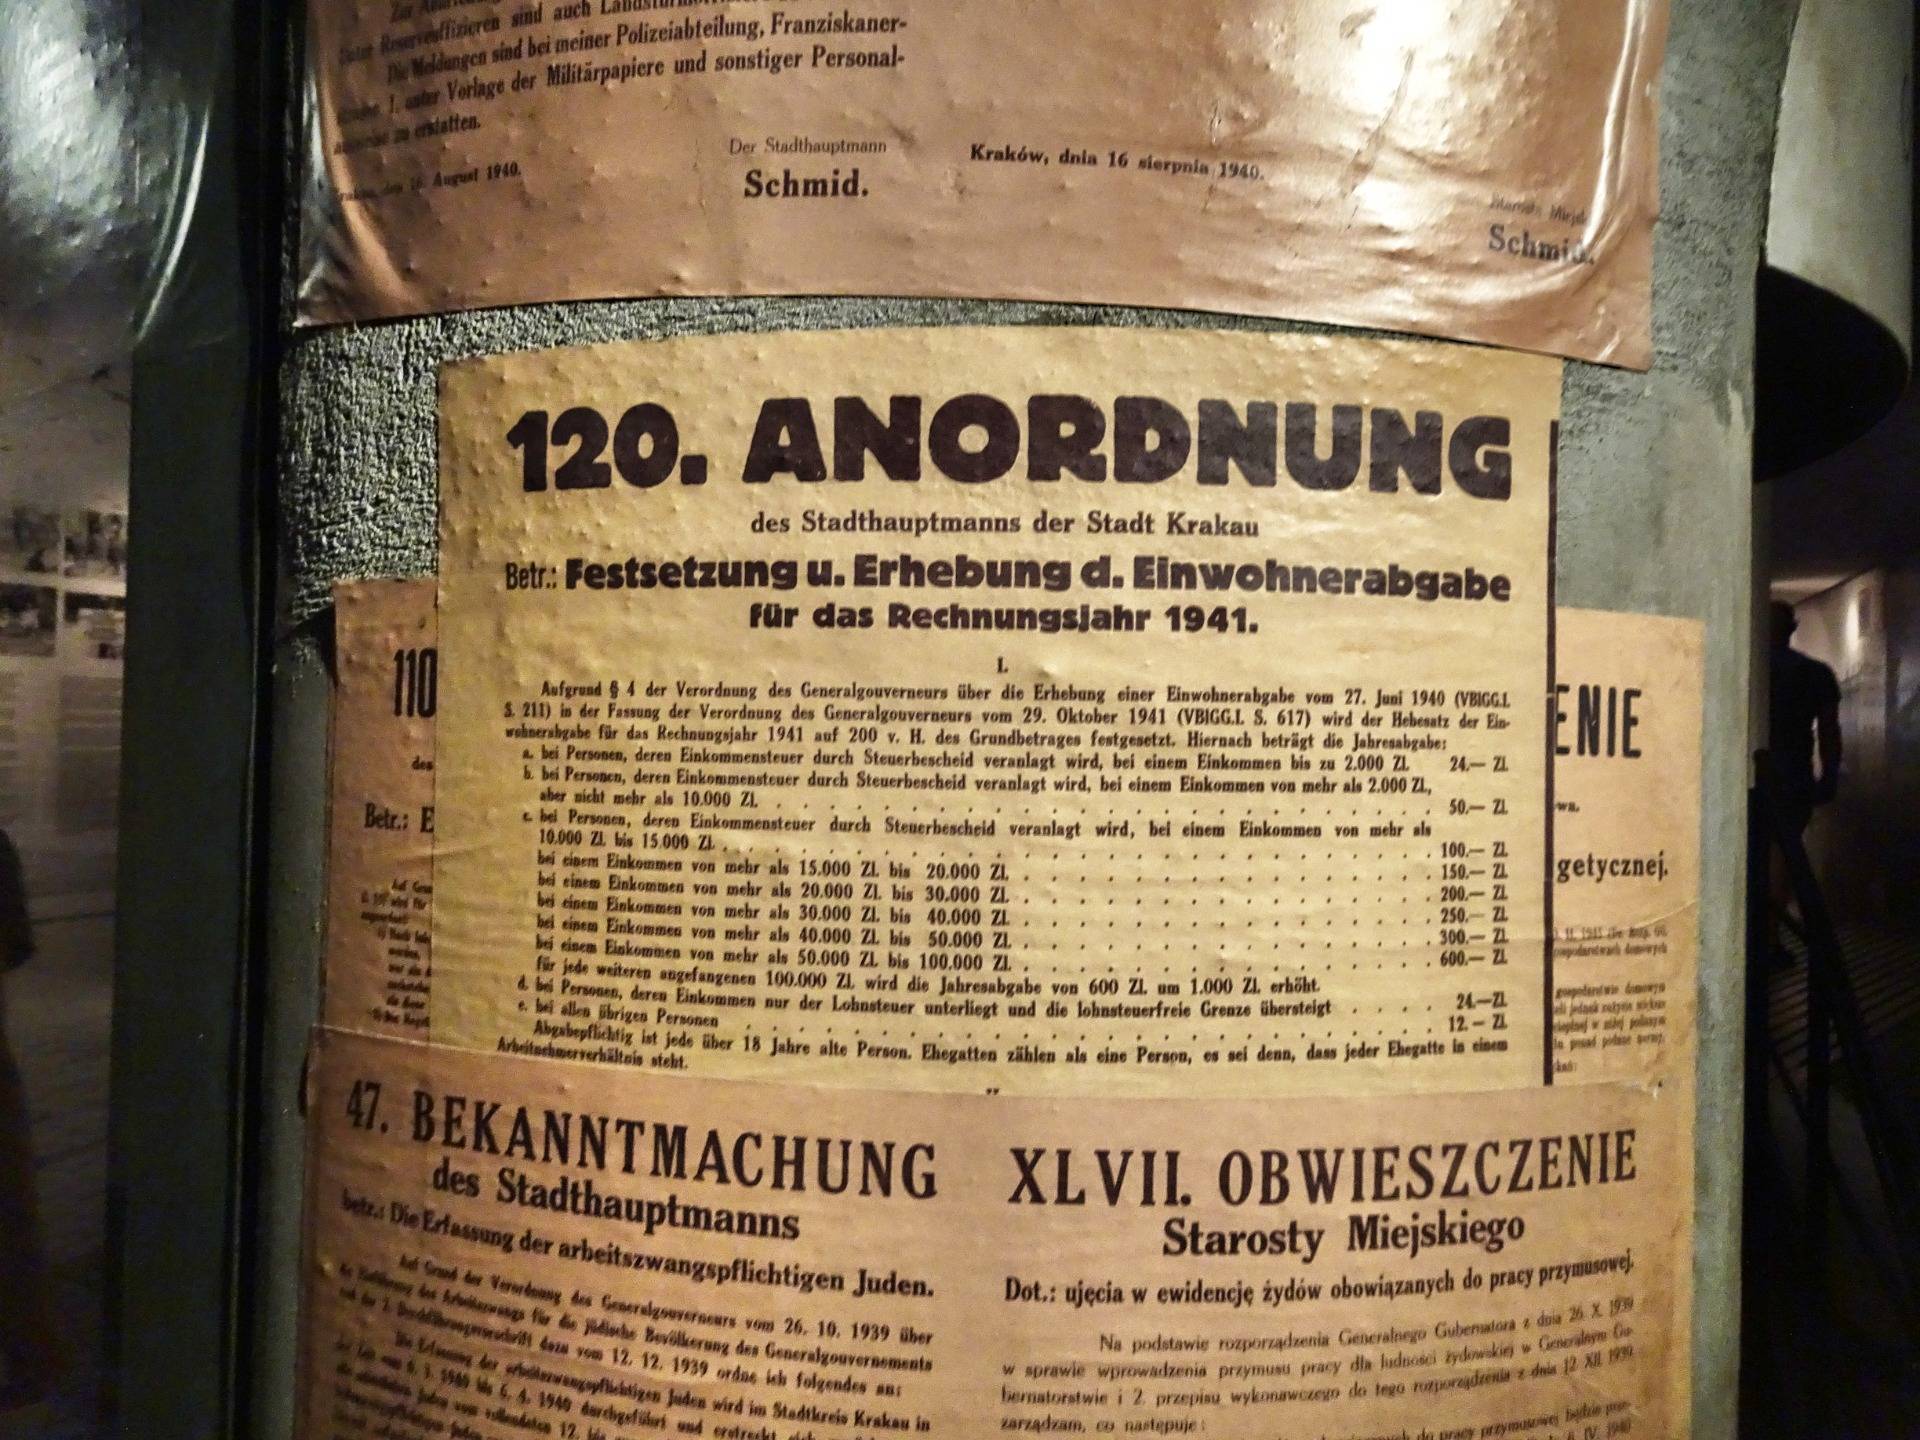 ”Anordnung” means rule